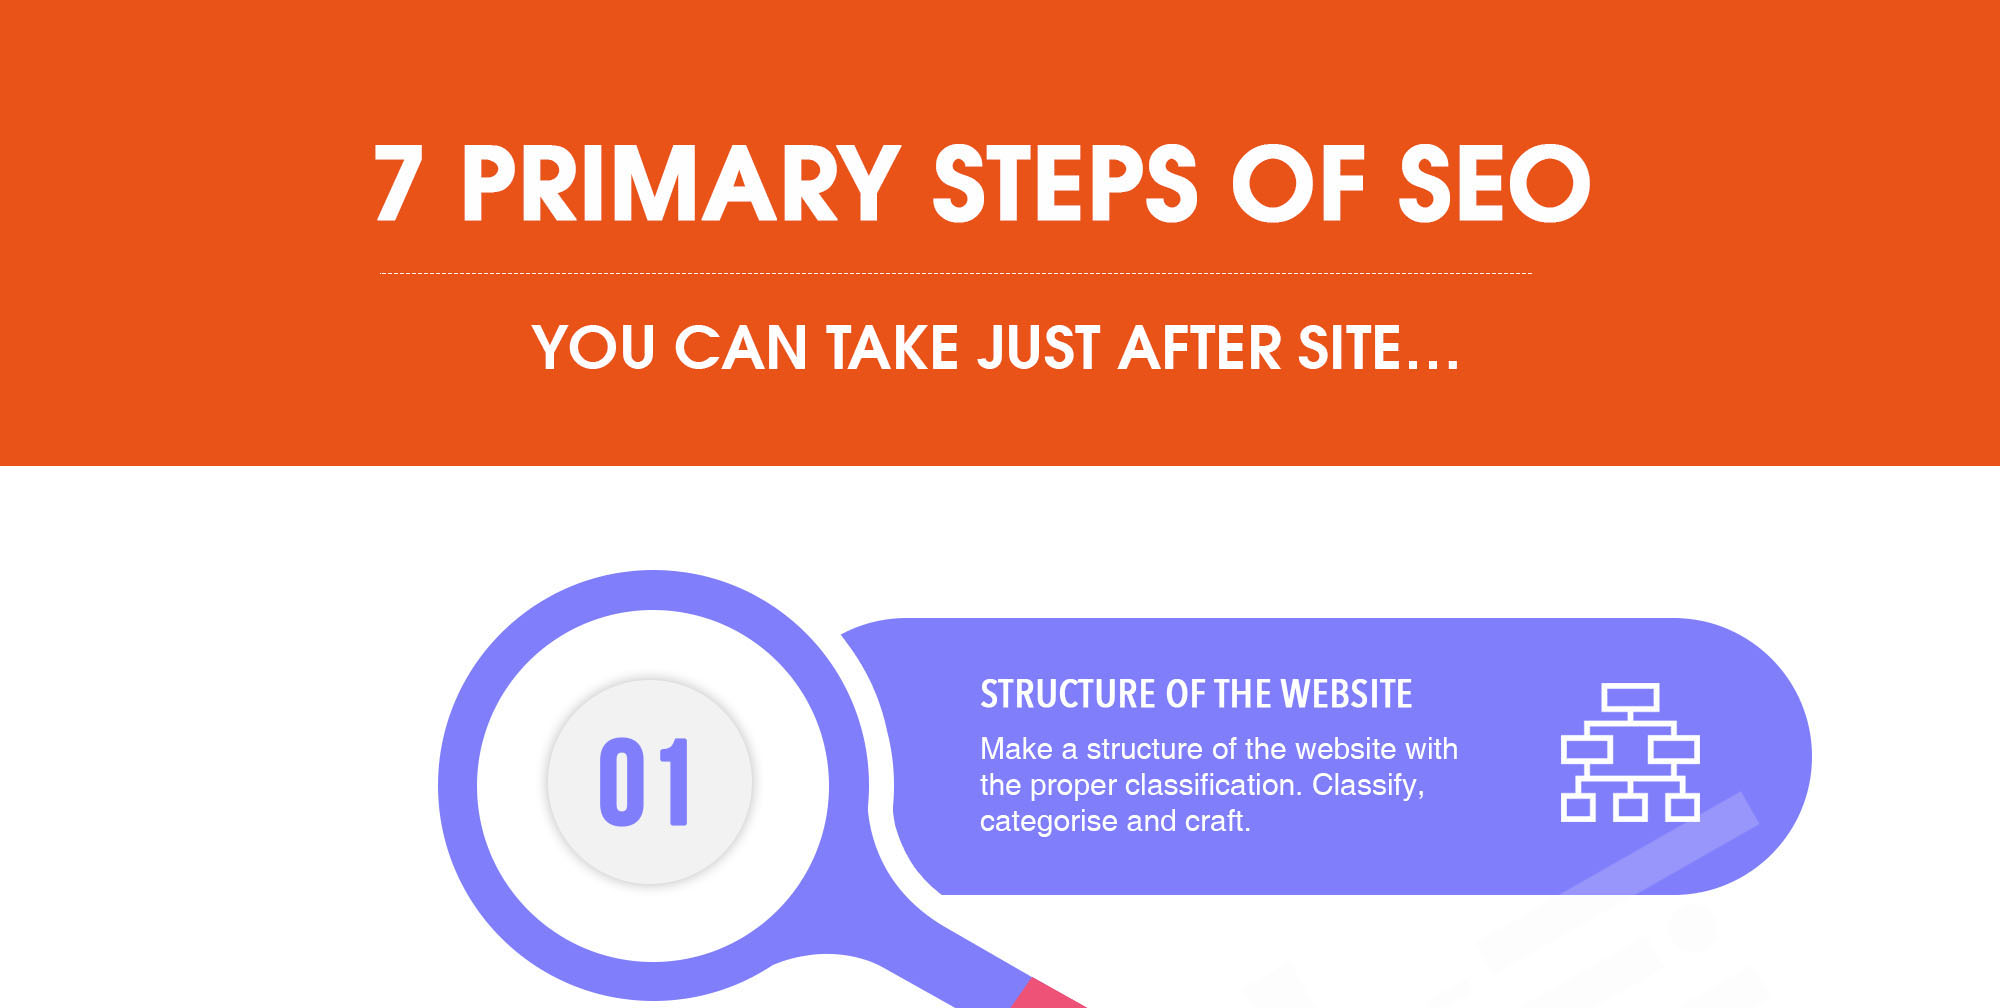 7 Primary Steps of SEO to Take After Just Launching Your Website